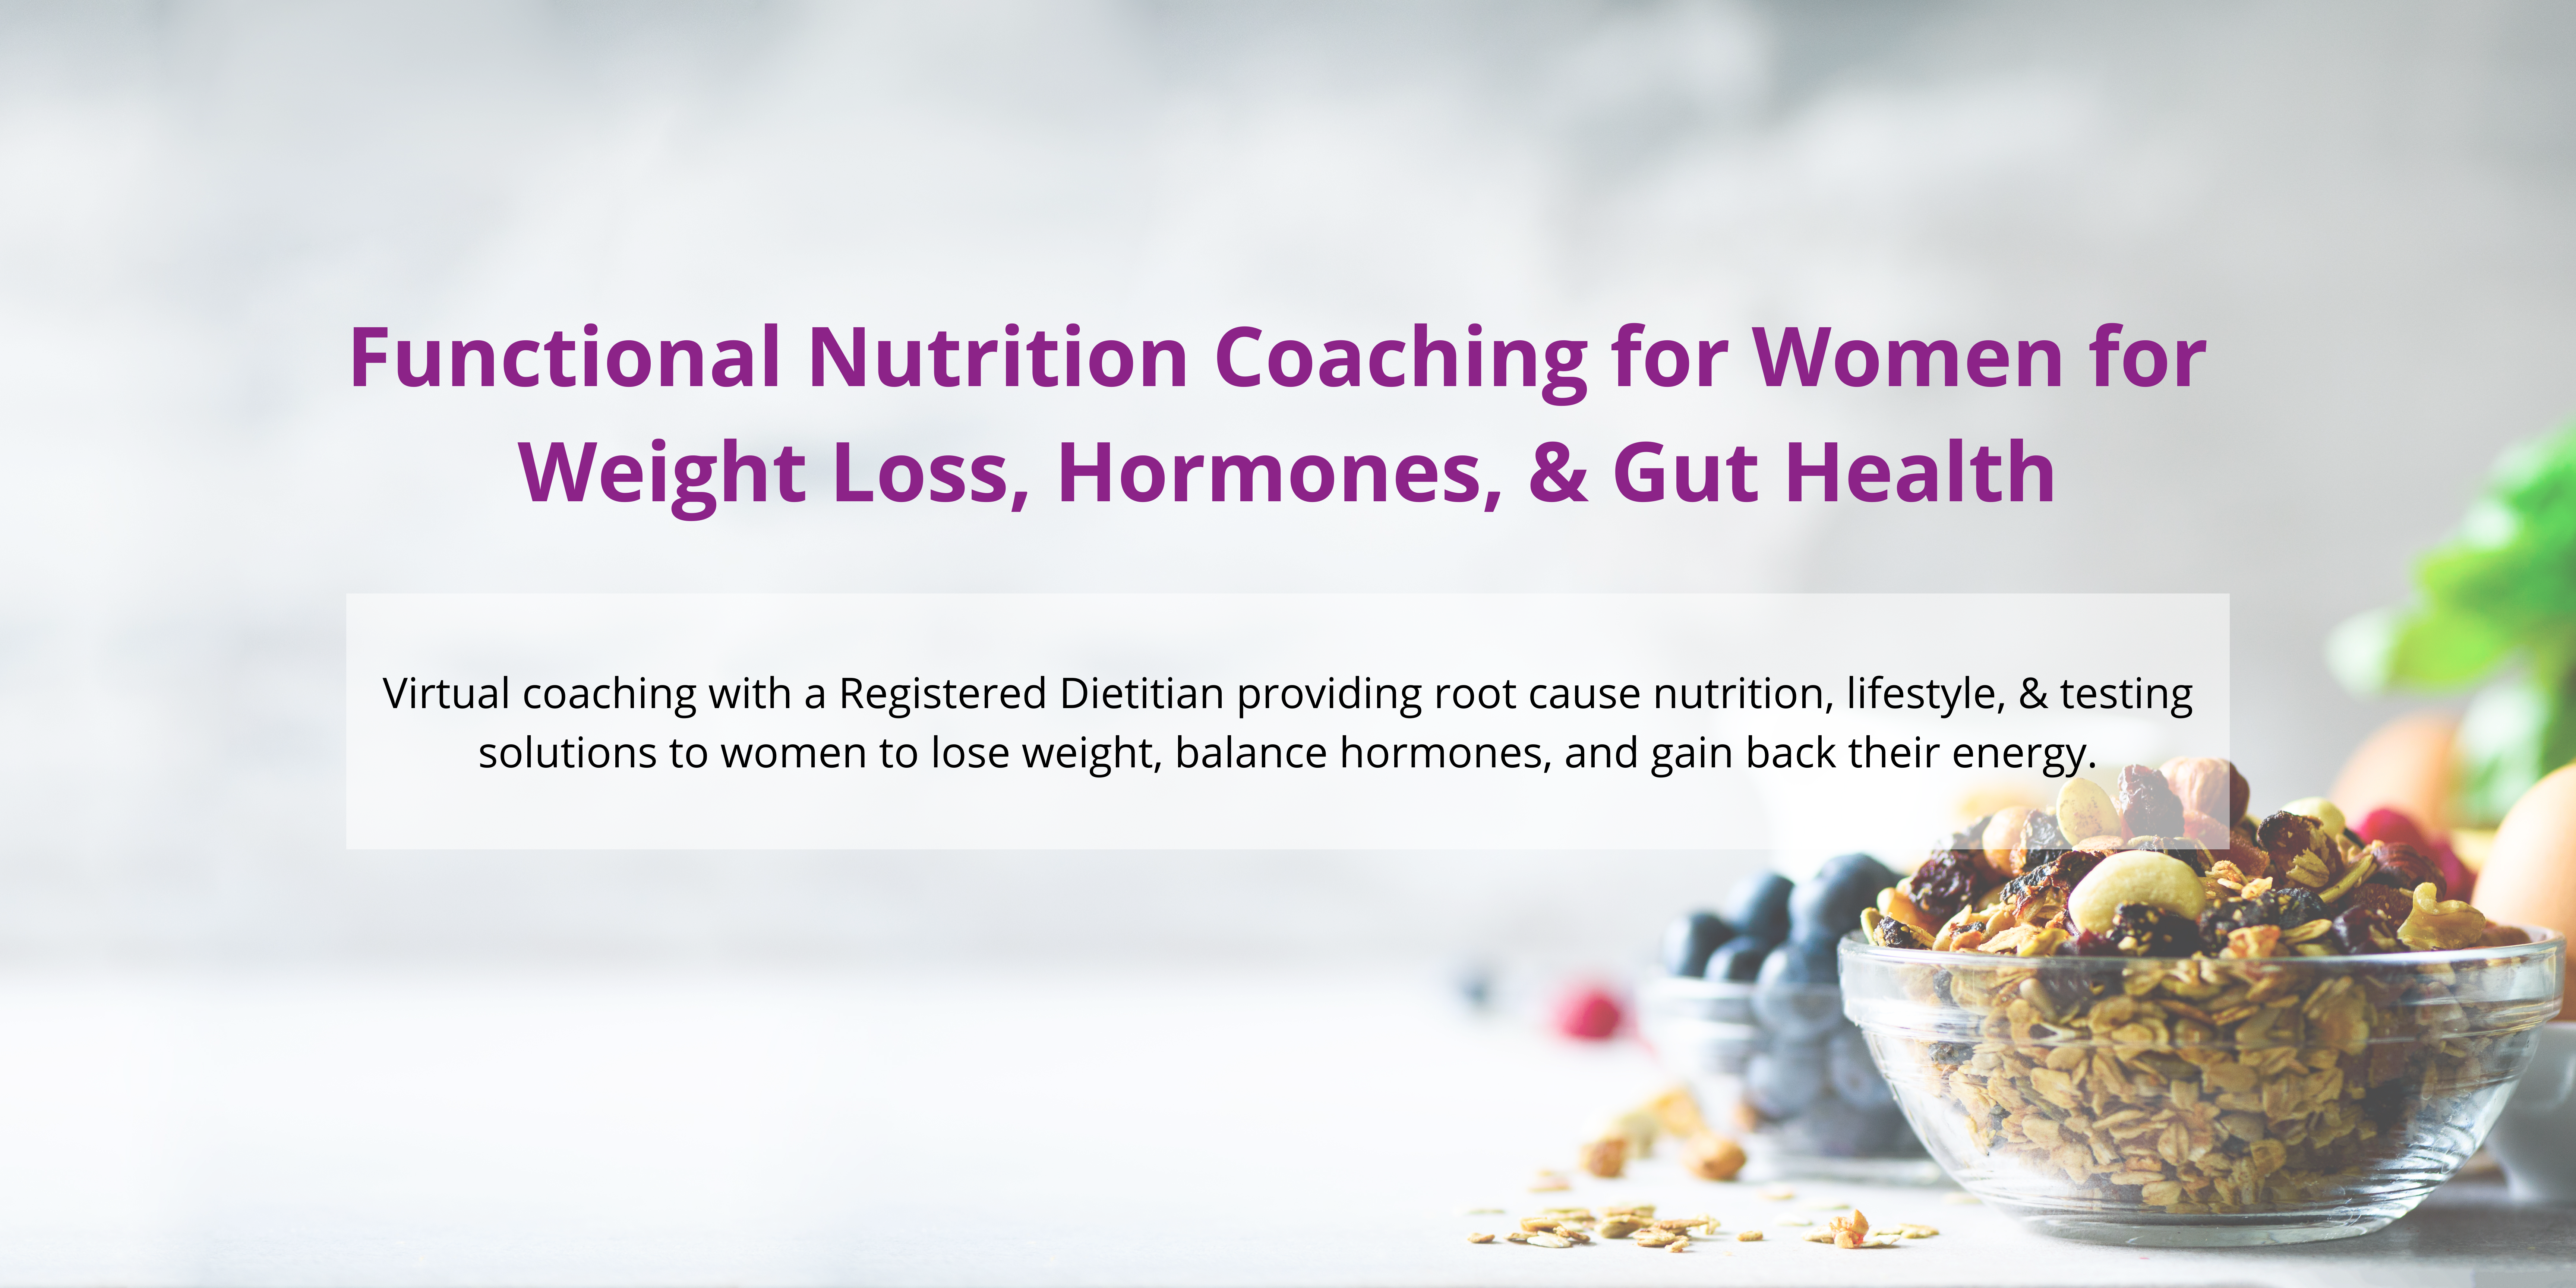 Functional Nutrition Coaching for Women for Weight Loss, Hormones, & Gut Health